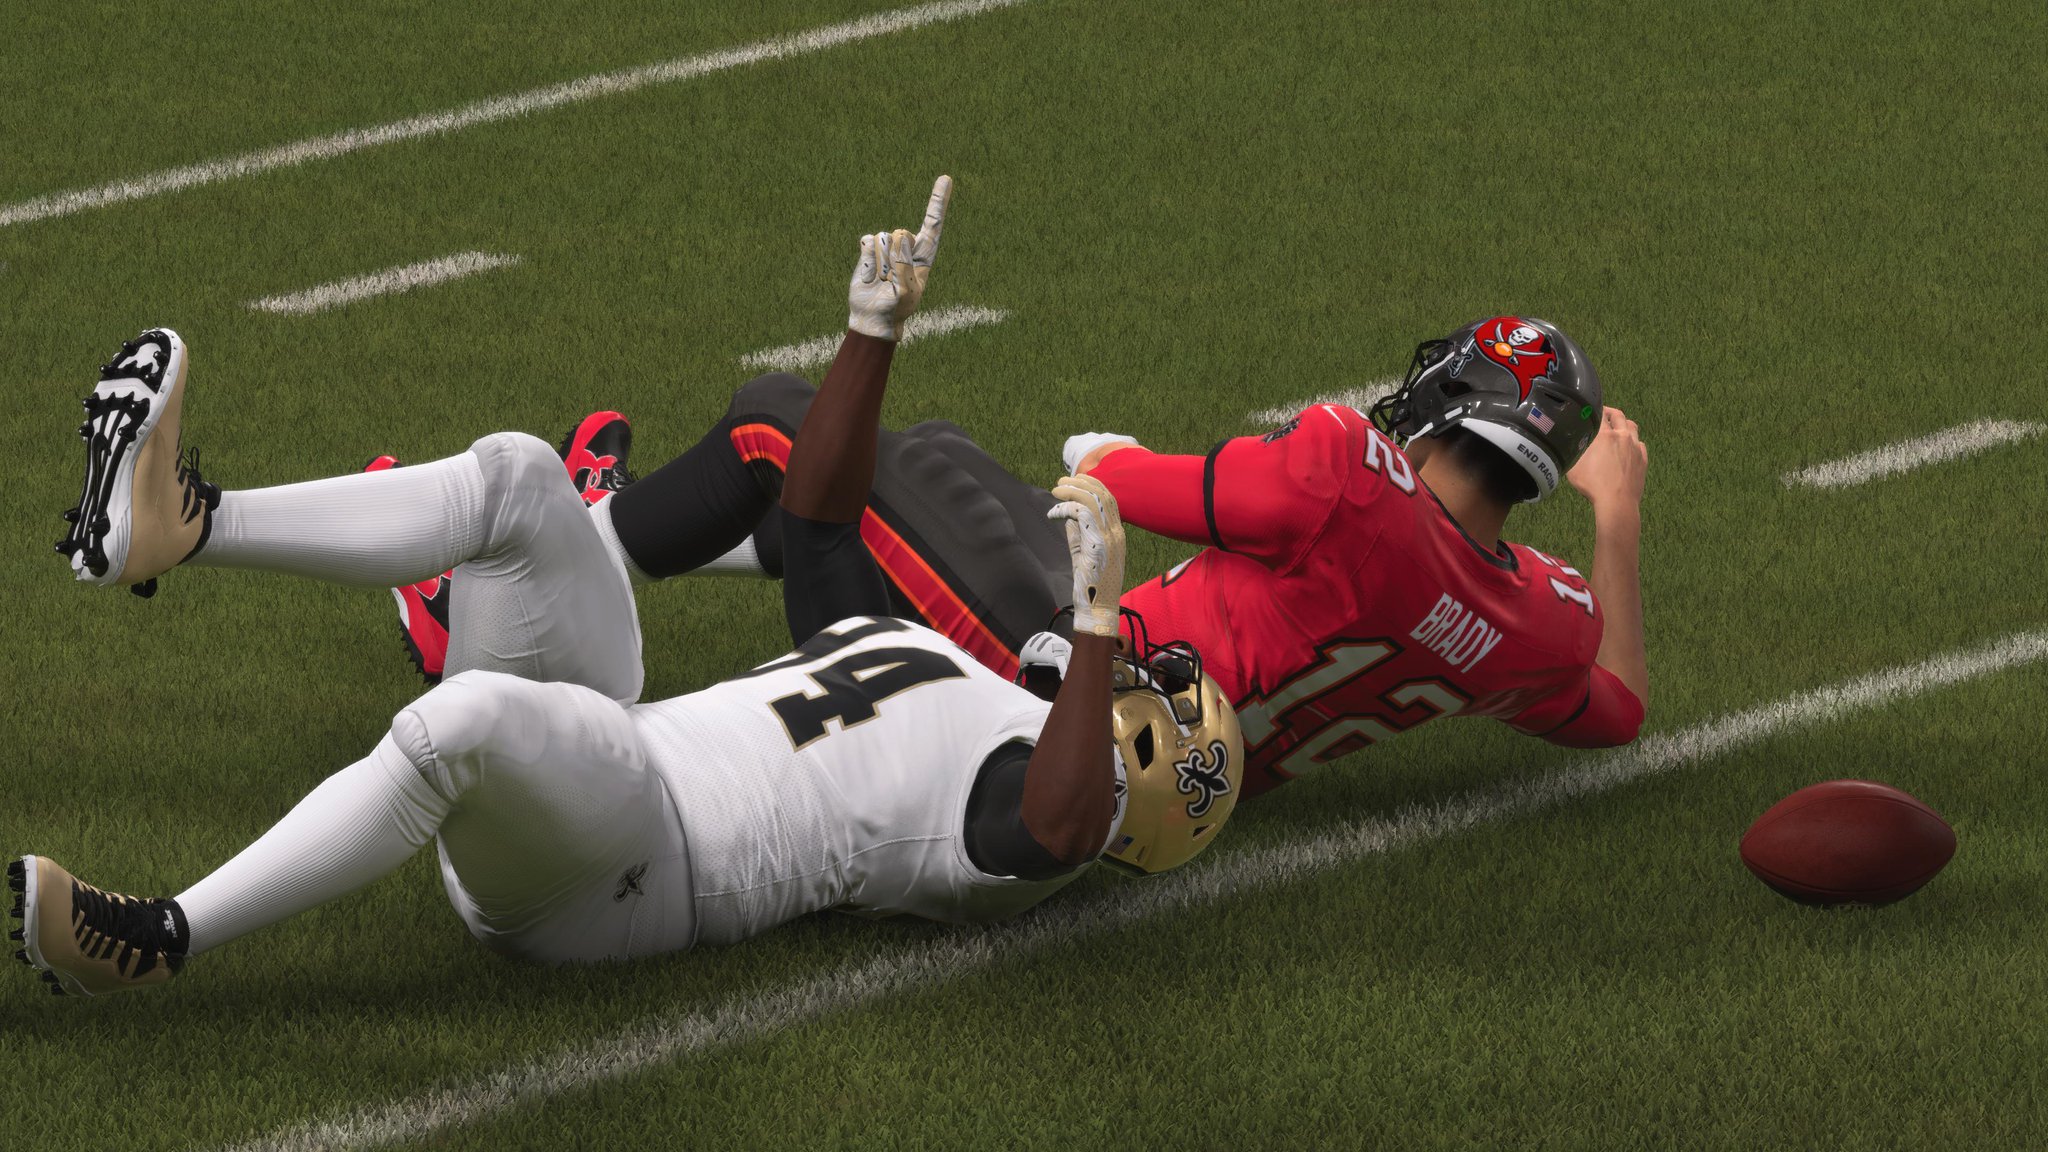 Madden Nfl 21 Emergency Title Update Available Now Resolves Server Sign On Issues Operation Sports